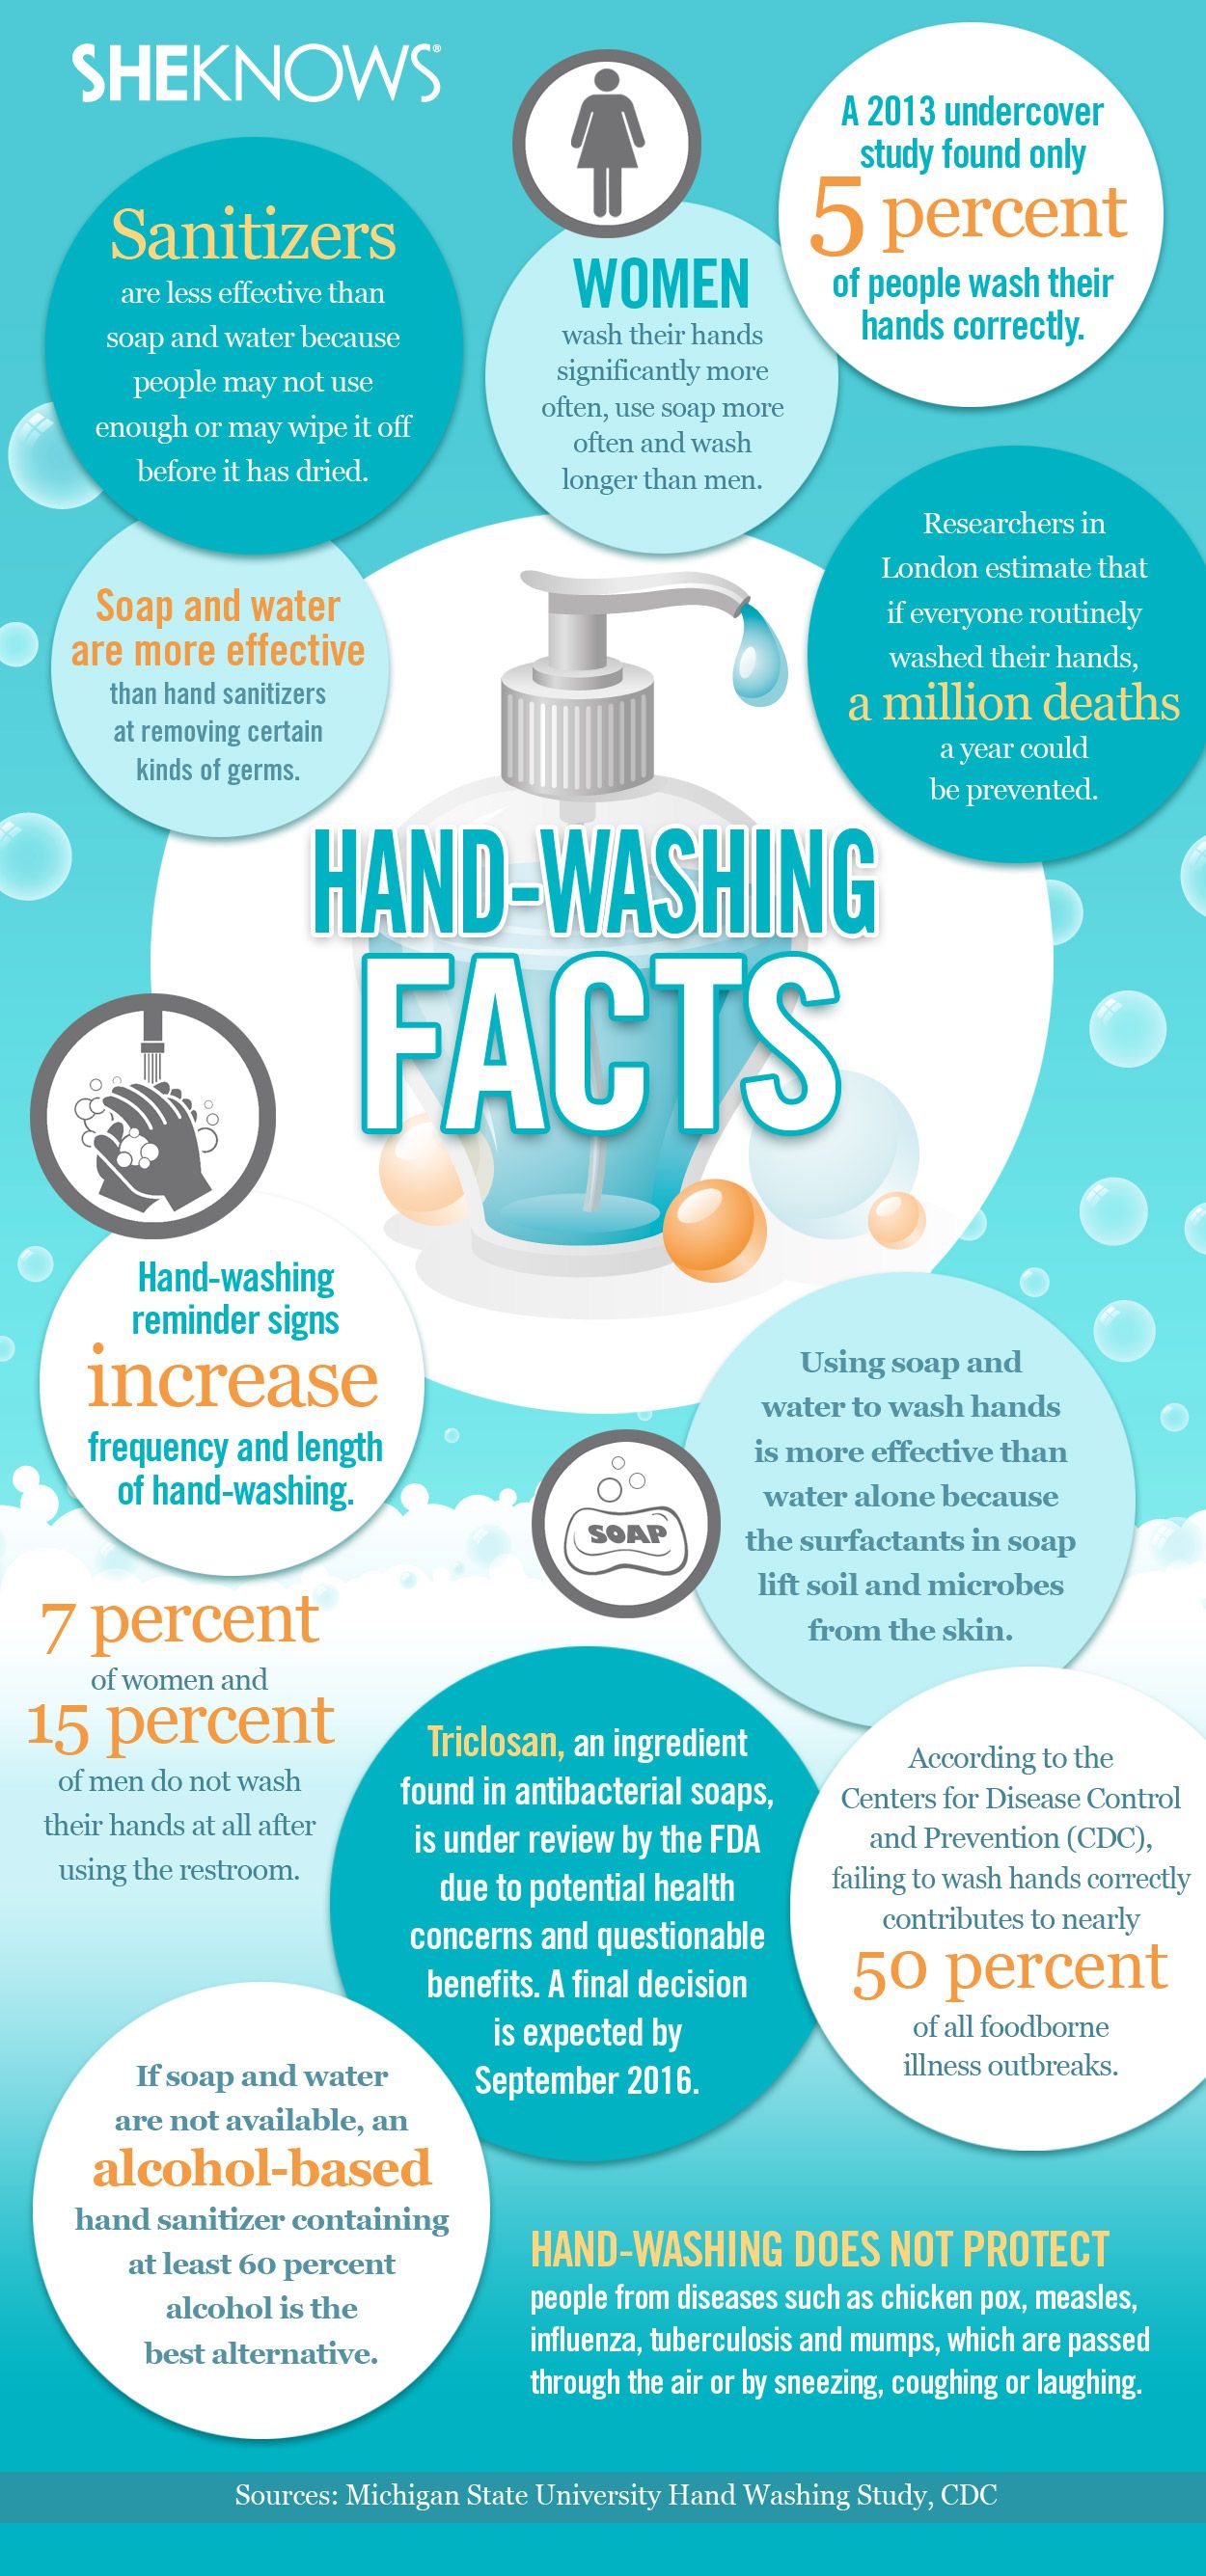 3 Dirty Little Secrets About Hand Washing & How to Do It Right